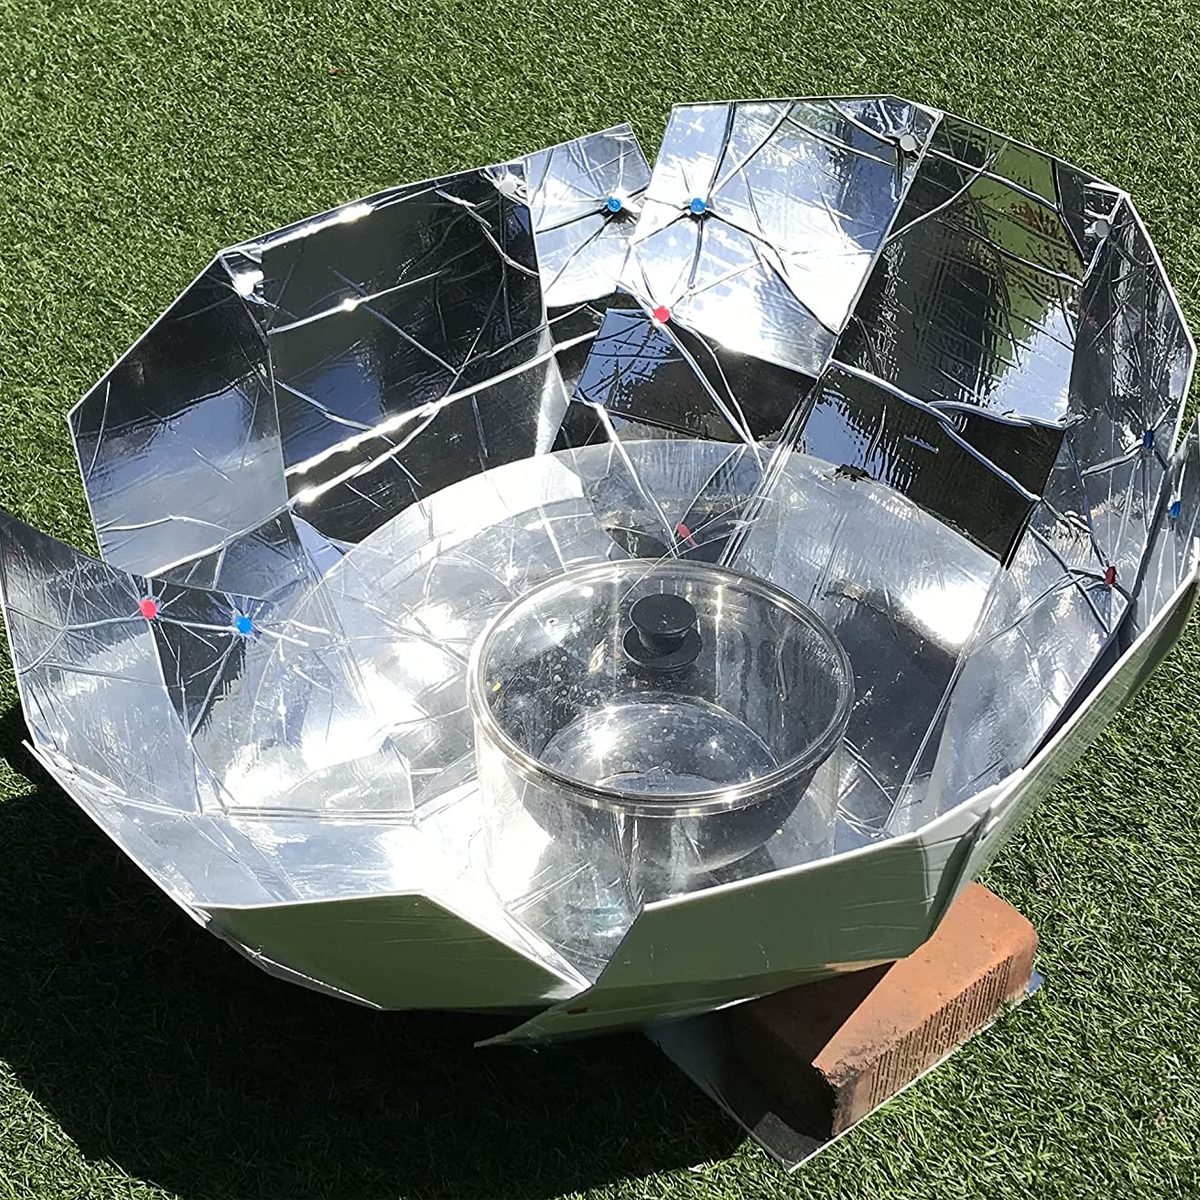 Best Portable Solar Oven Options for On-the-Go Meals